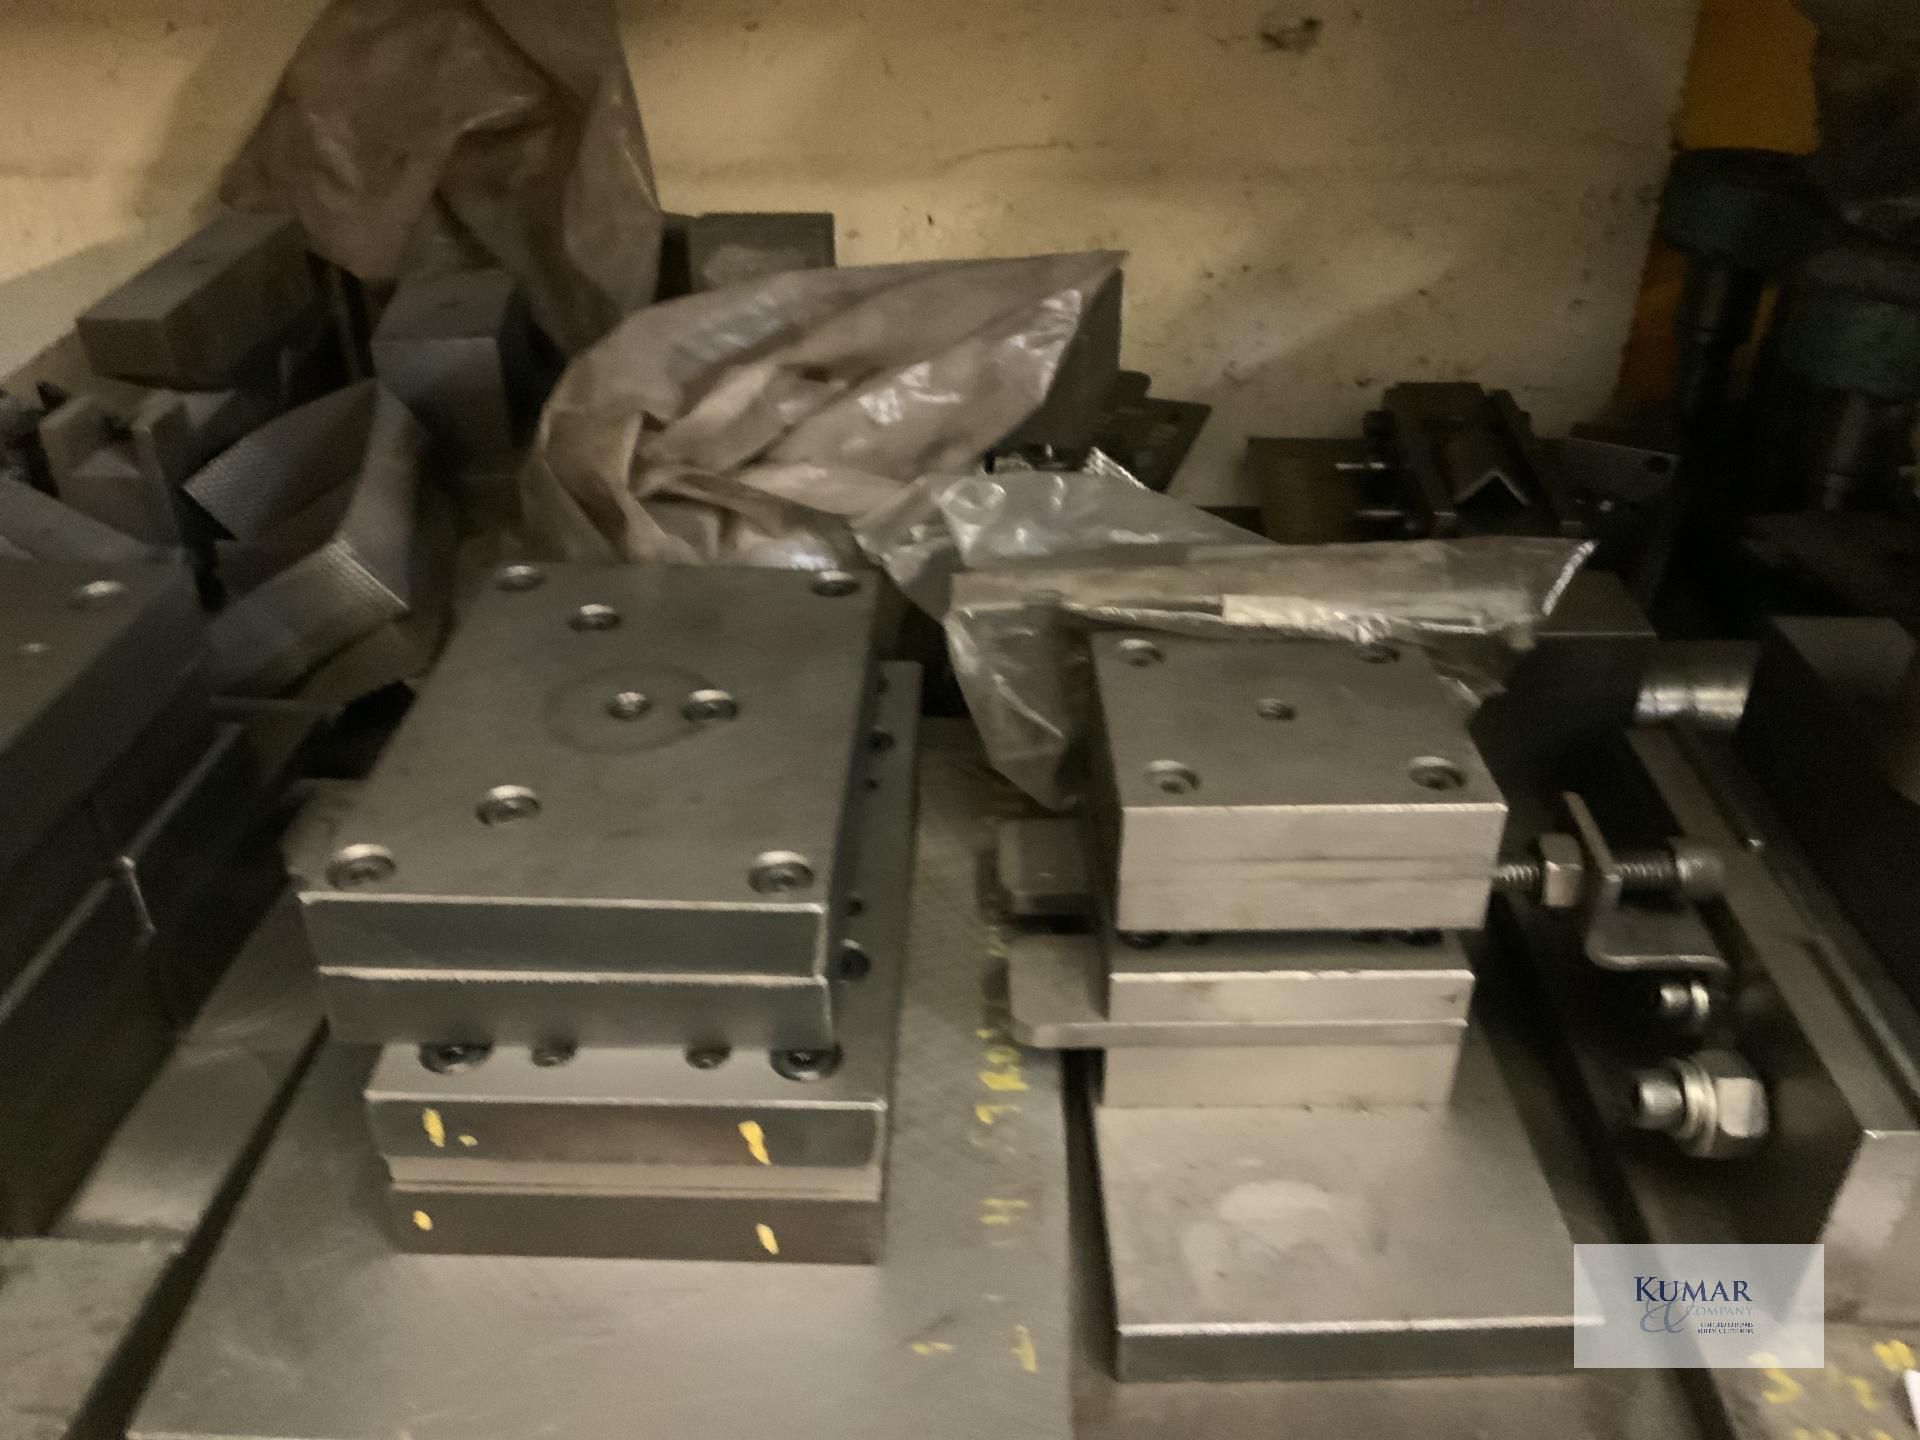 Machine tooling as imaged  Collection Day – Tuesday 27th February Unit 4 Goscote Industrial - Image 8 of 9